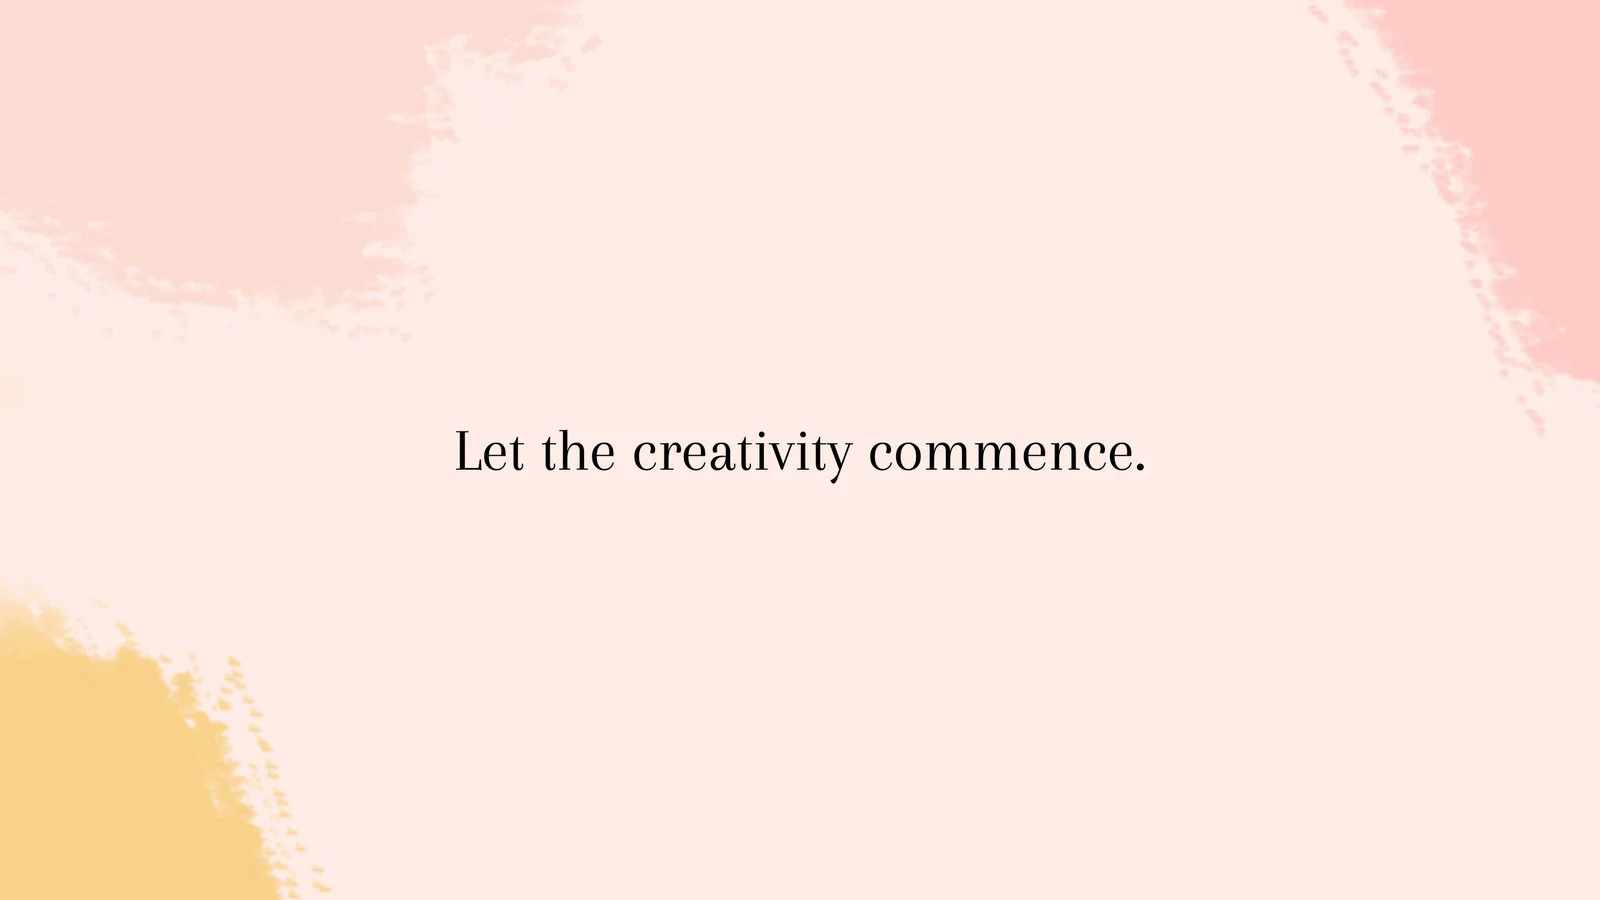 Inspiring Quotes to Spark Your Creativity